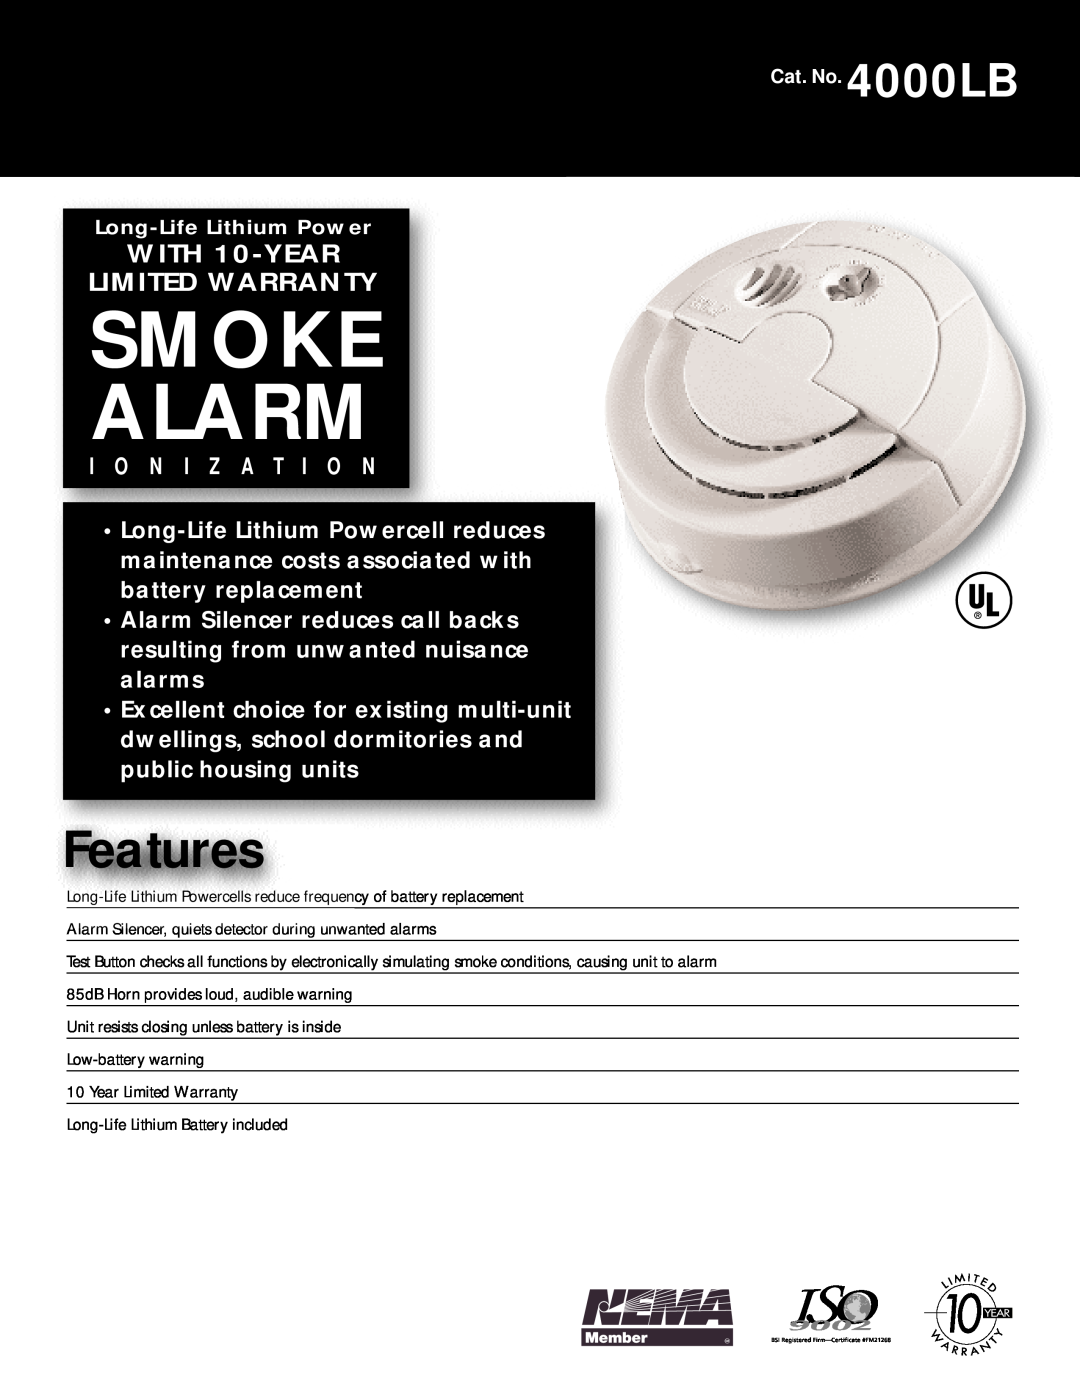 BRK electronic 4000LB warranty Smoke Alarm, Features, WITH 10-YEAR LIMITED WARRANTY 